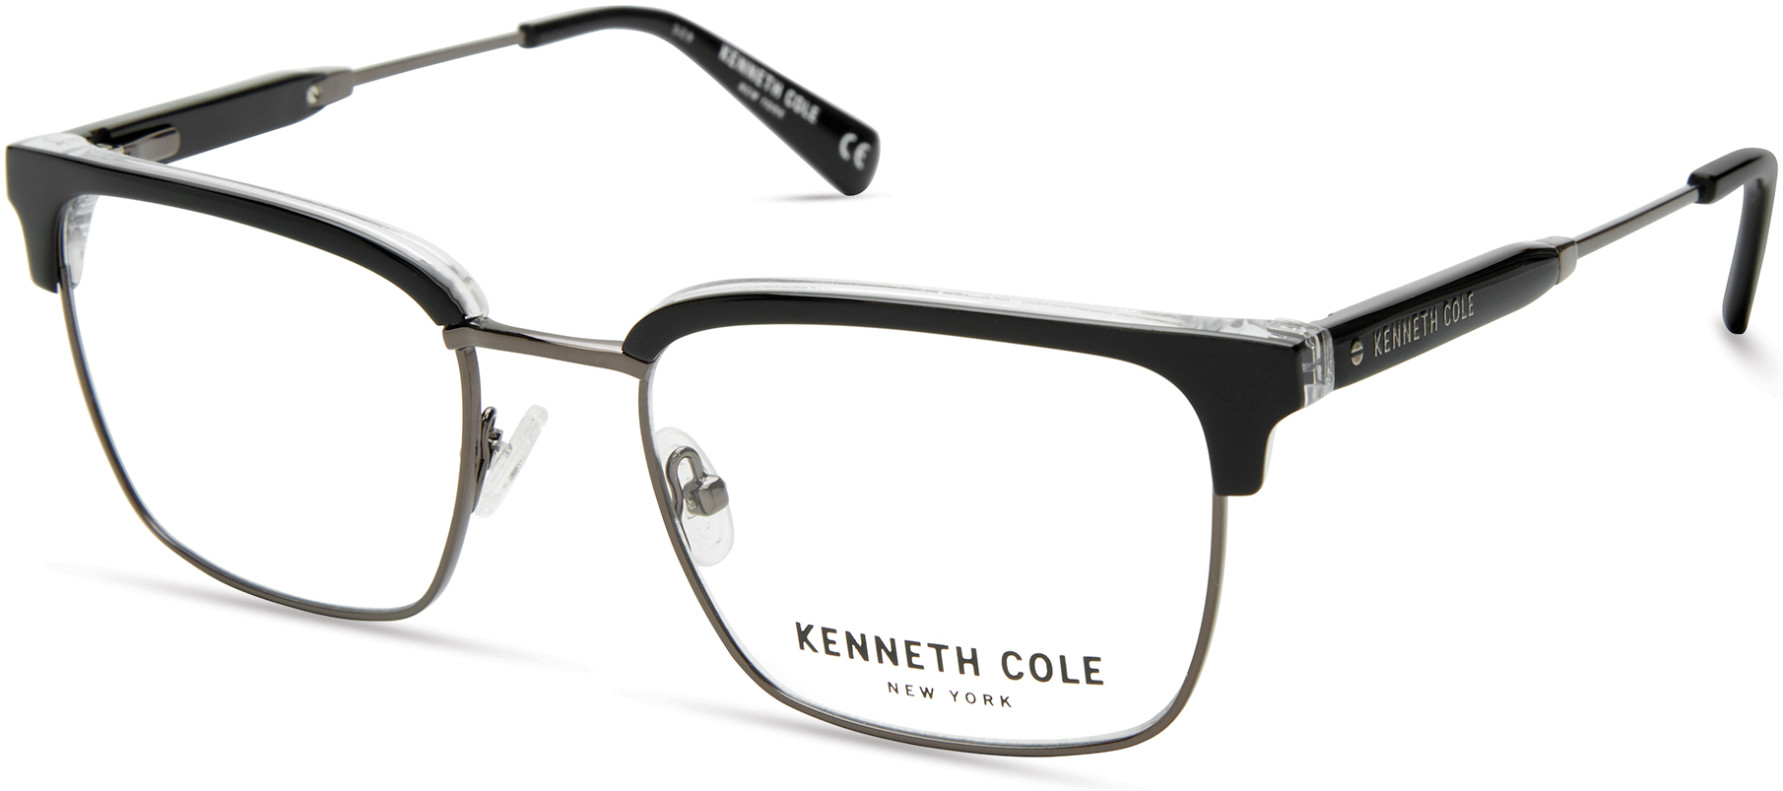 KENNETH COLE NY 0303 005